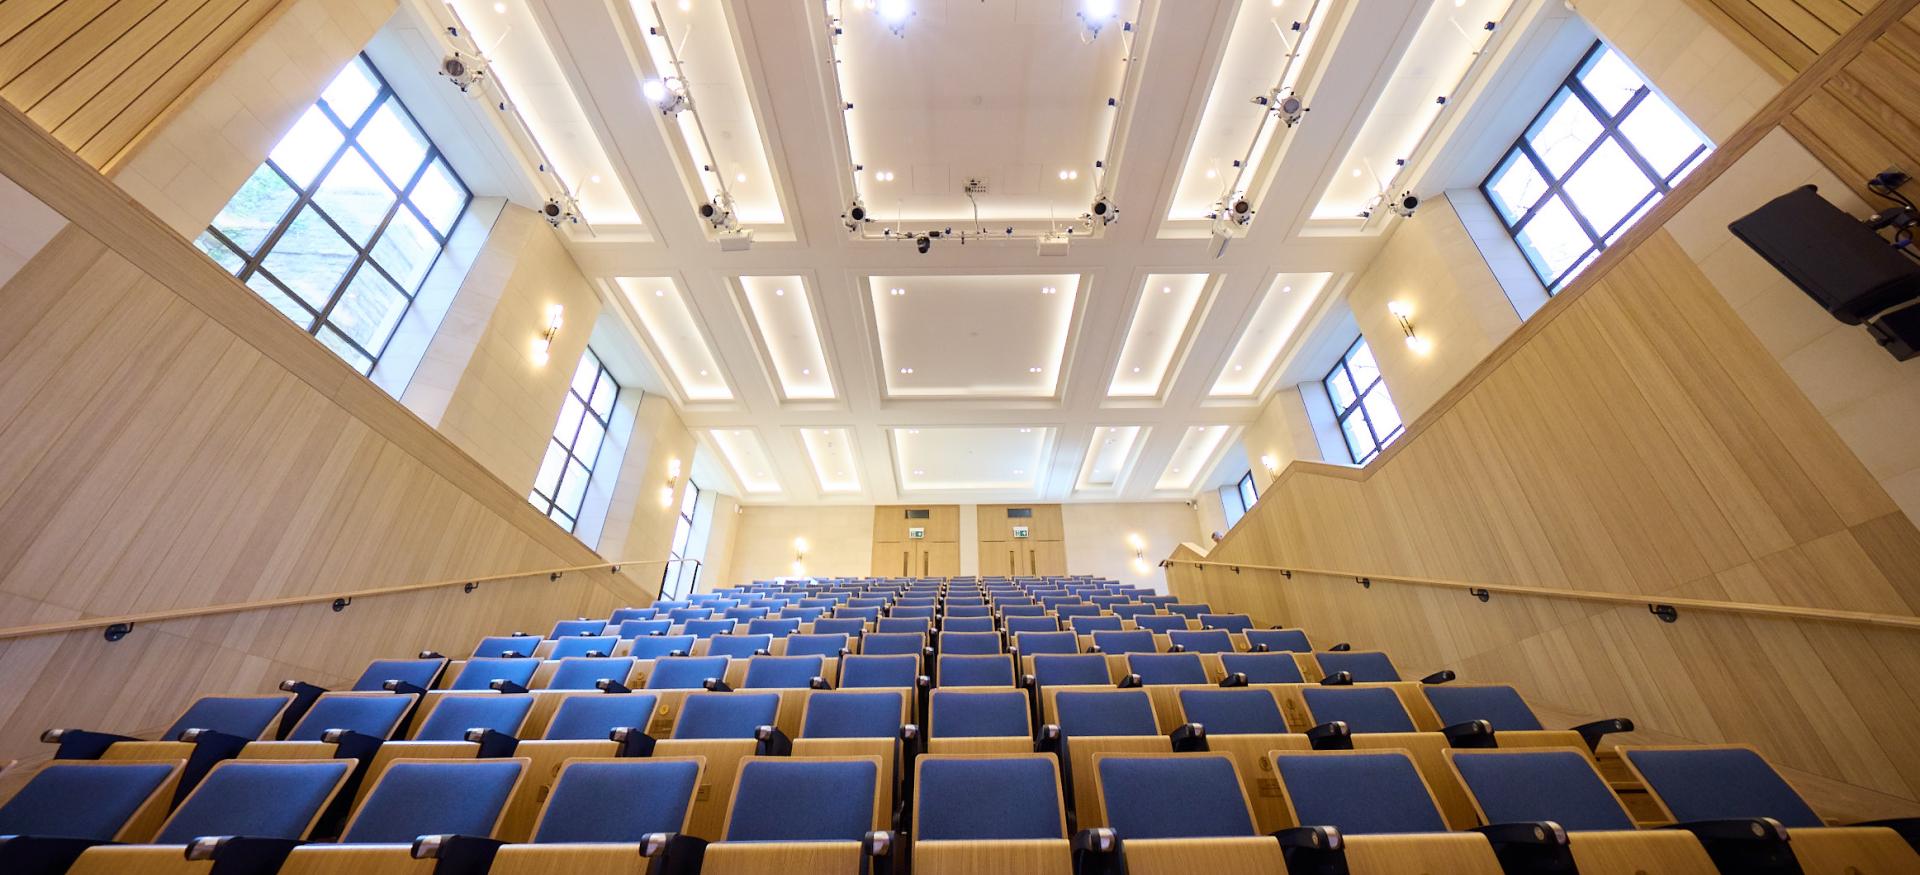 A view of the Trinity College de Jager auditorium looking upwards into the seating from the stage.